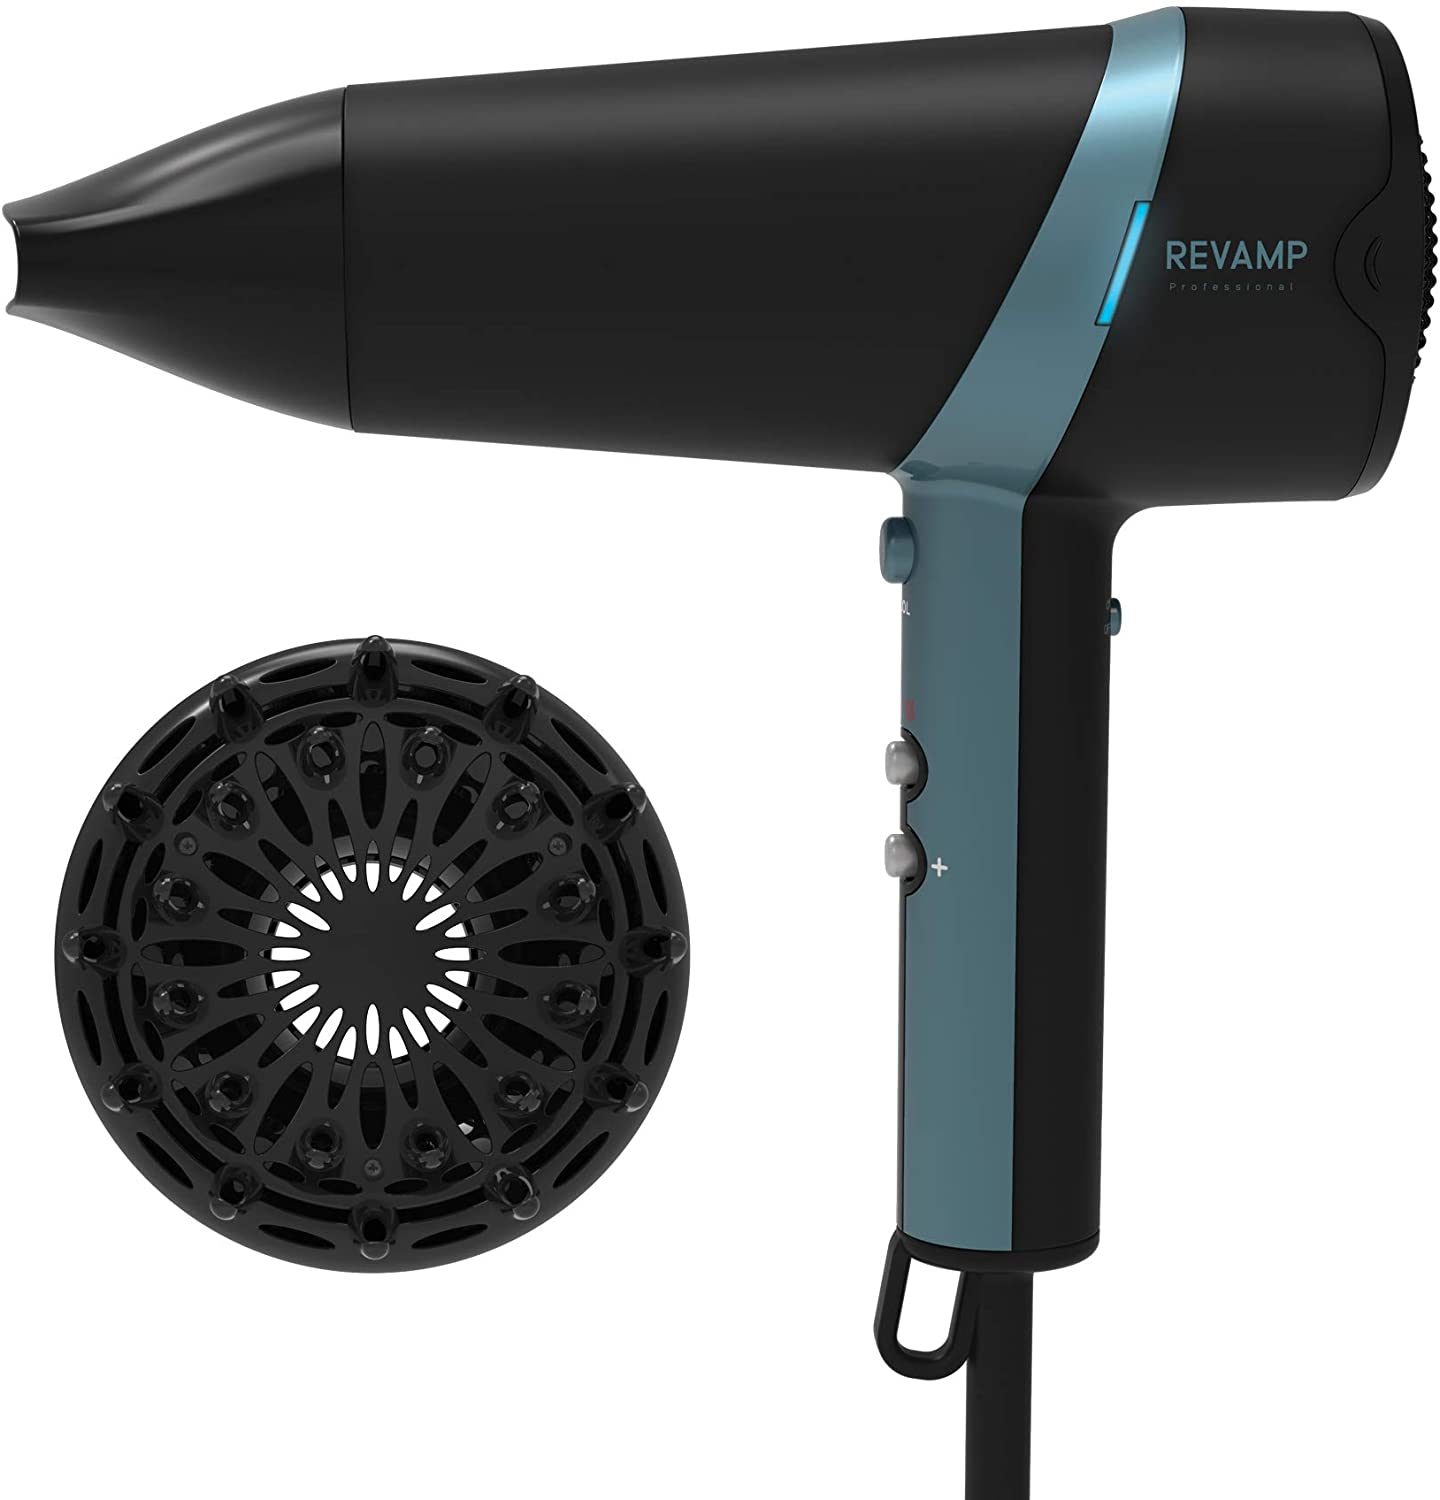 Revamp Progloss 5000 Hair Dryer, Lightweight Hair Dryer with Diffuser and Nozzle, Ion Technology for Smooth Hair and Enriched with Progloss Oils Keratin, Coconut & Argan, Black Item Name (aka Title)